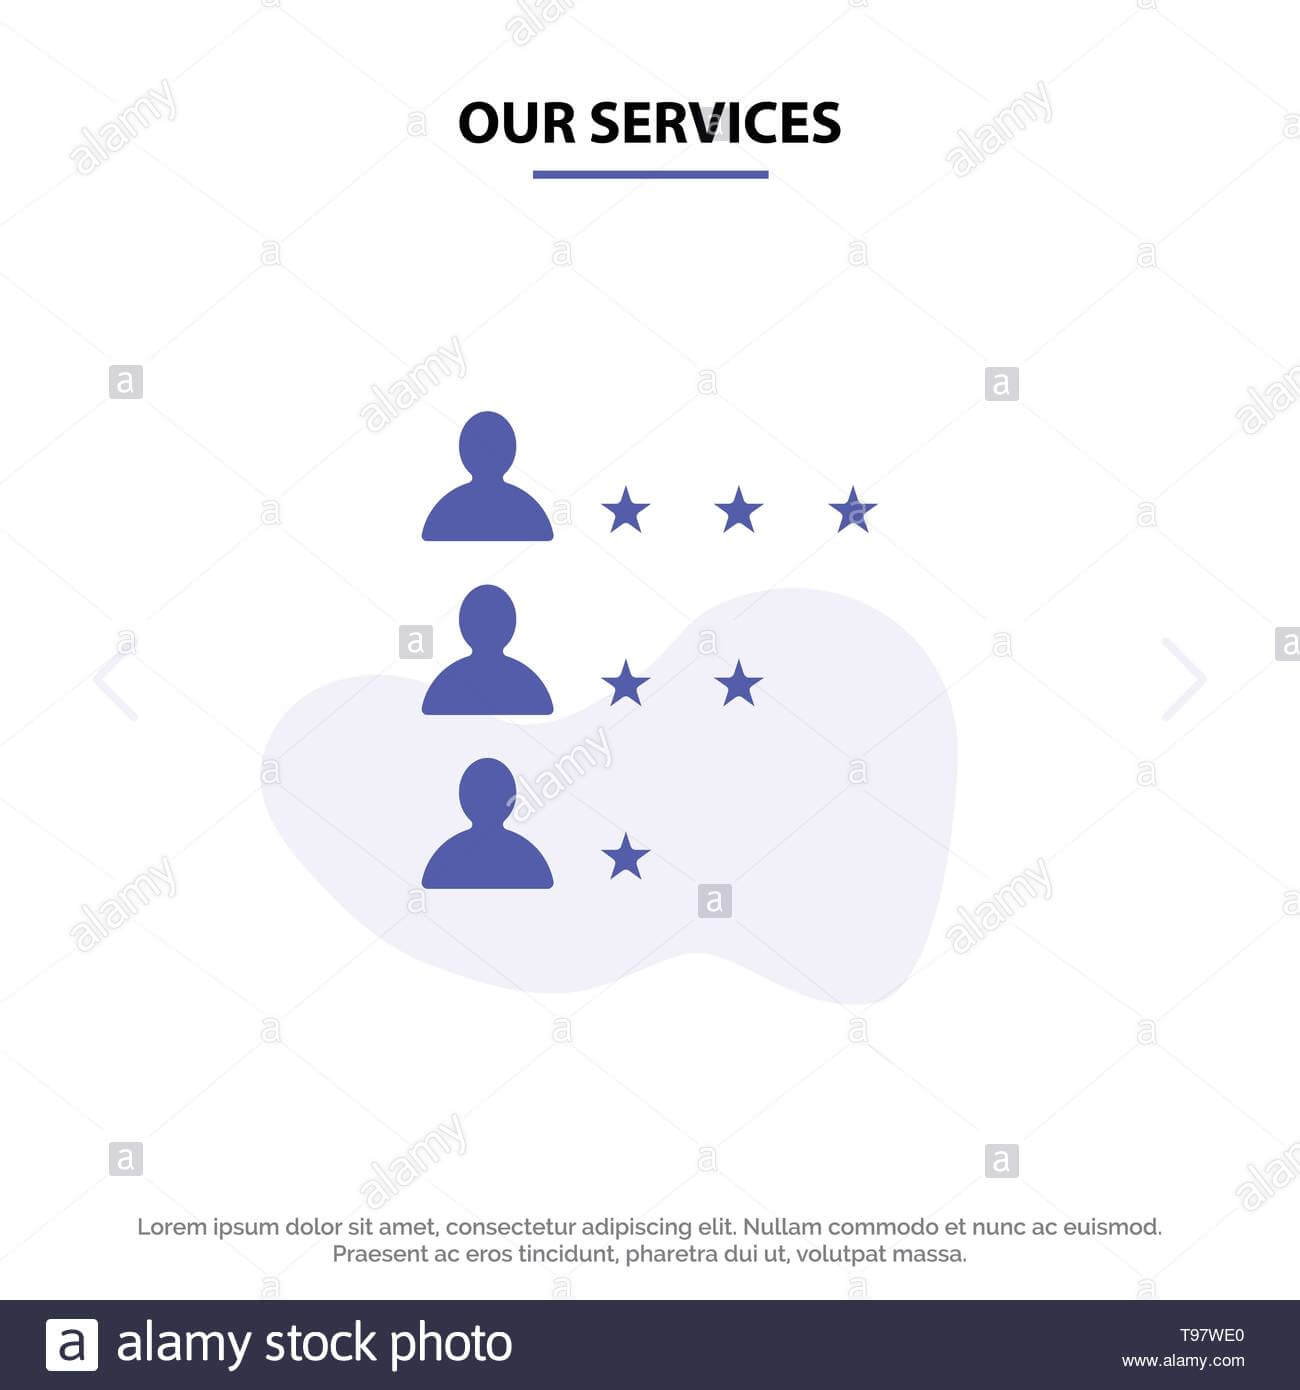 Our Services Business, Job, Find, Network Solid Glyph Icon For Service Job Card Template